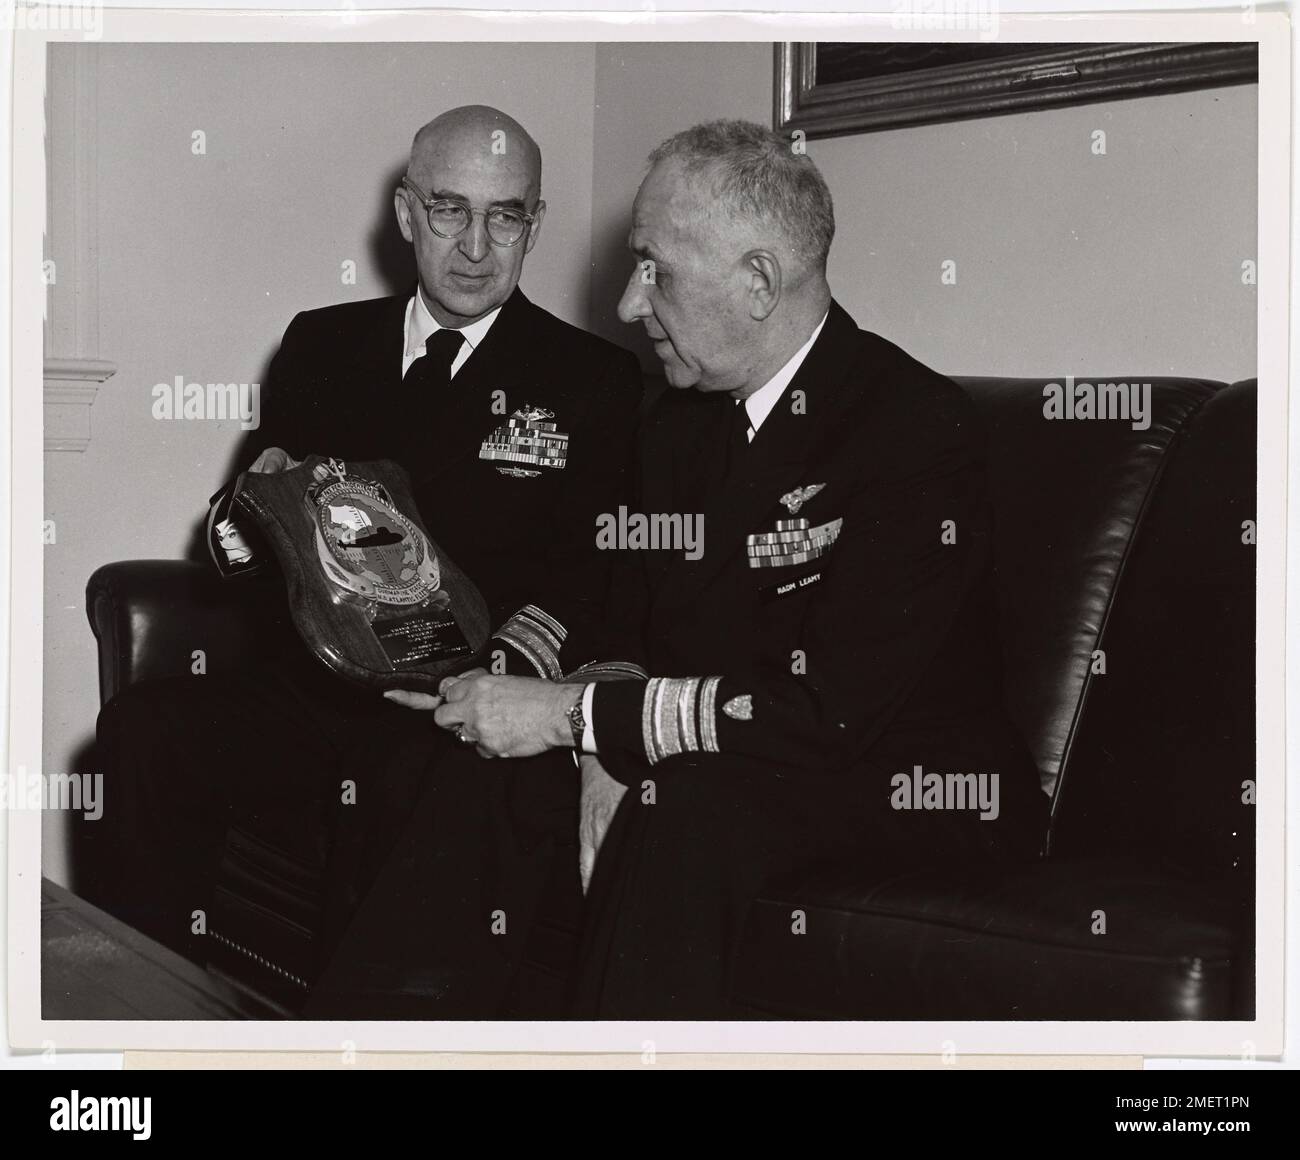 Rear Admiral Lawrence R. Daspit, U.S. Navy, presents a plaque to Rear Admiral F. A. Leamy, superintendent of the U.S. Coast Guard Academy. Rear Admiral Lawrence R. Daspit, USN, (left), commander, Submarine Force, Atlantic Fleet, presents a plaque to Rear Admiral F.A. Leamy, USCG, superintendent of the U.S. Coast Guard Academy. The plaque, which displays the emblem of the North Atlantic Submarine Fleet, was given to Admiral Leamy 'in appreciation of his loyal friendship to the Submarine Force, United States Atlantic Fleet.'. Stock Photo